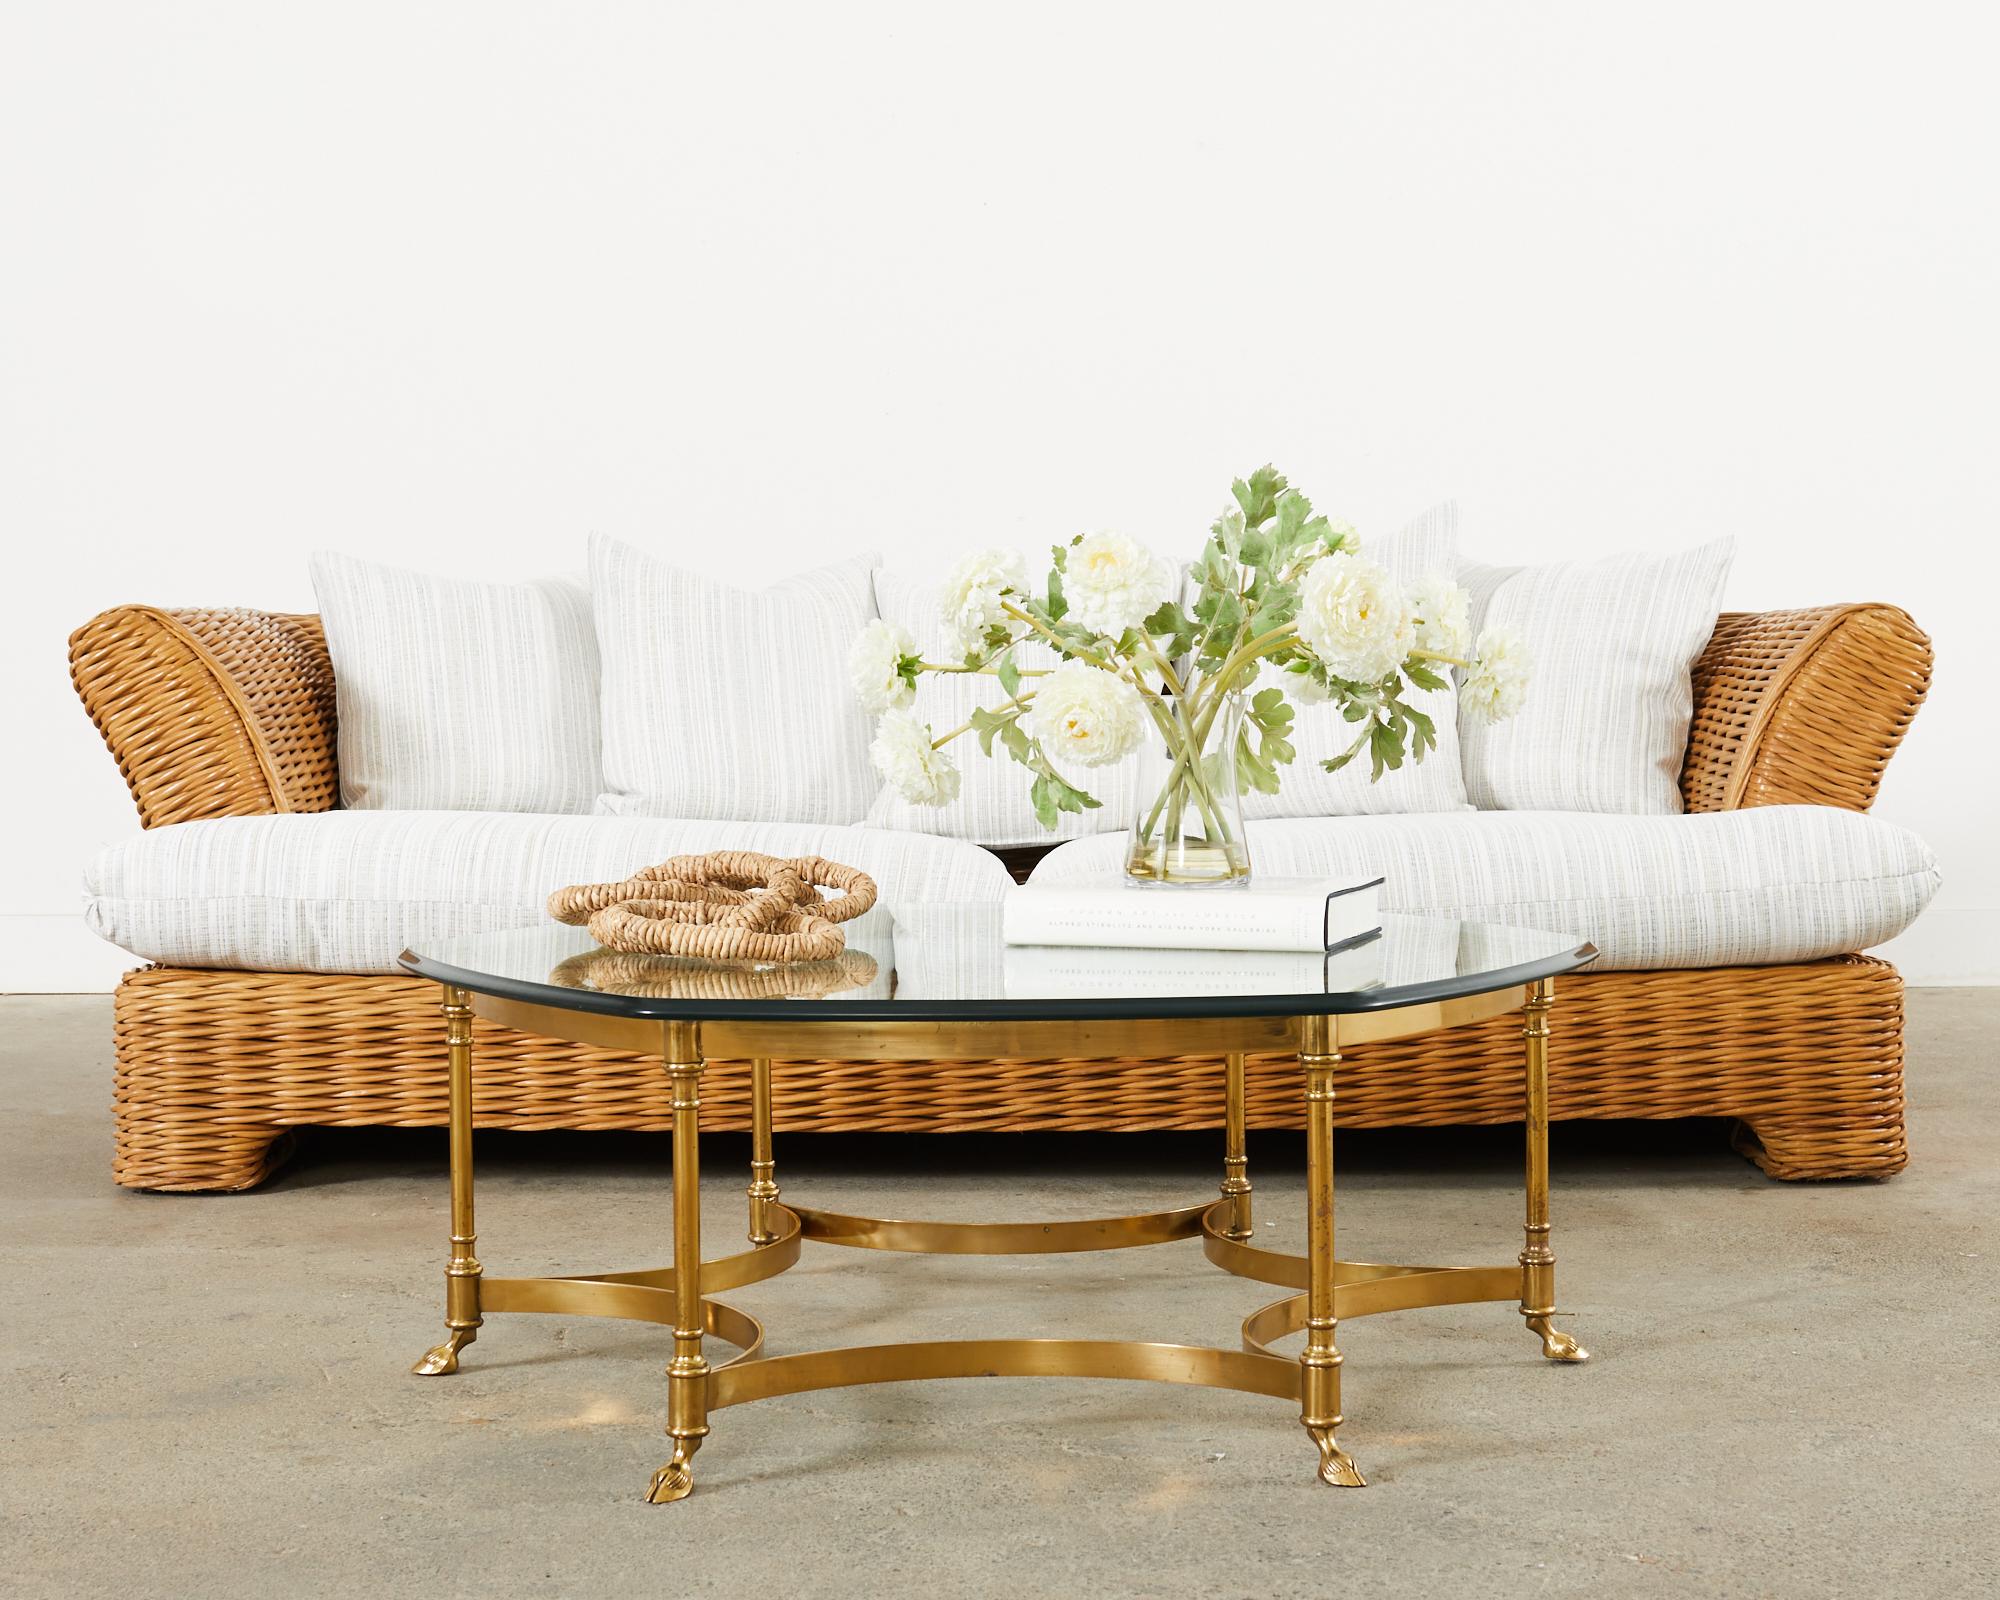 Iconic Italian mid-century modern brass cocktail coffee table made by LaBarge. Constructed in the Hollywood regency taste featuring a hexagonal formed brass frame with column style supports ending with hoof feet. The legs are conjoined by gracefully